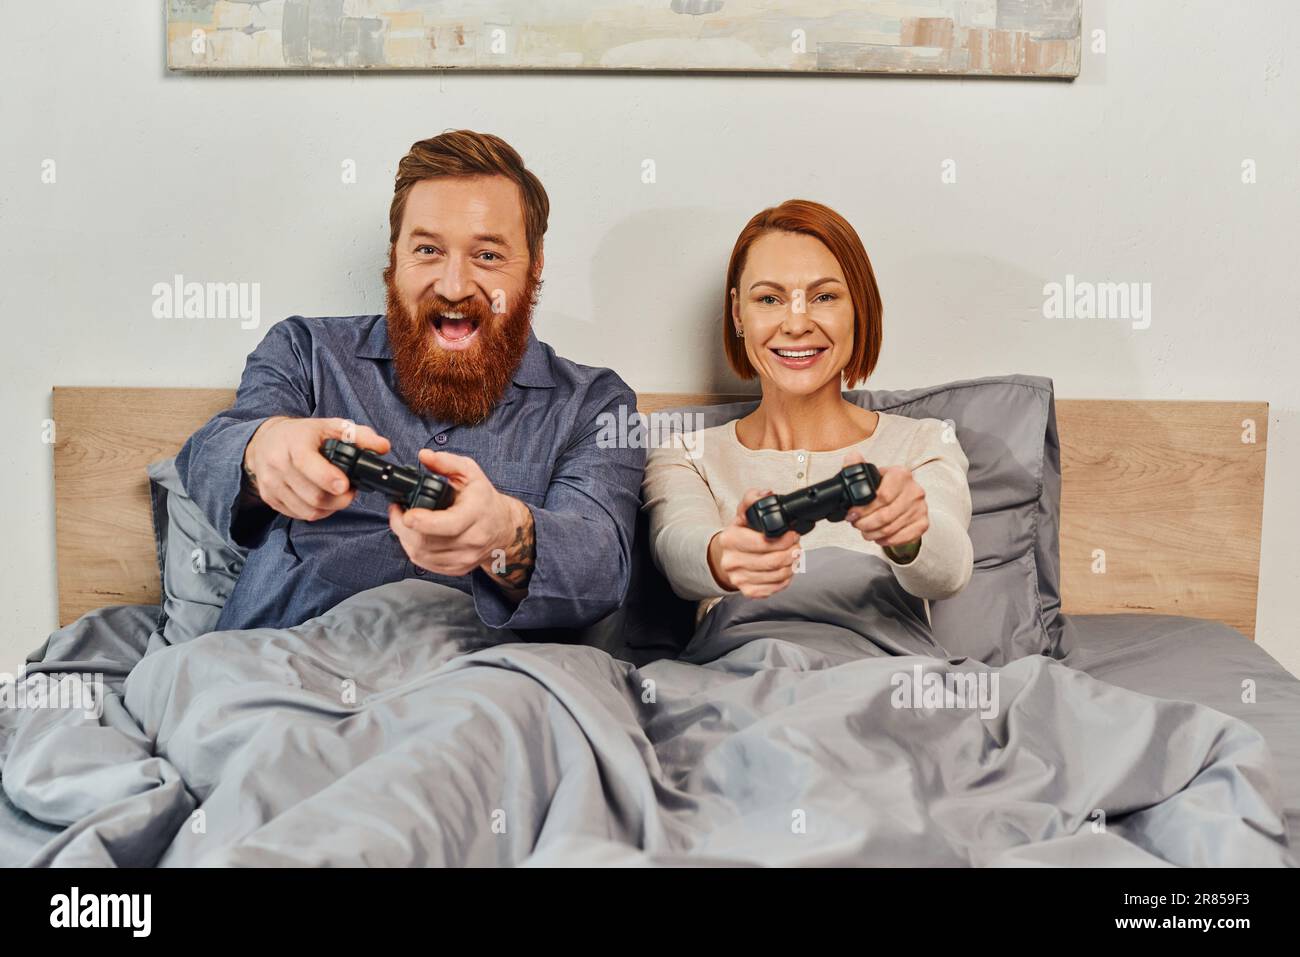 weekends without kids, redhead husband and wife playing video game, bearded man and happy woman holding joysticks, excited, gaming fun, married couple Stock Photo